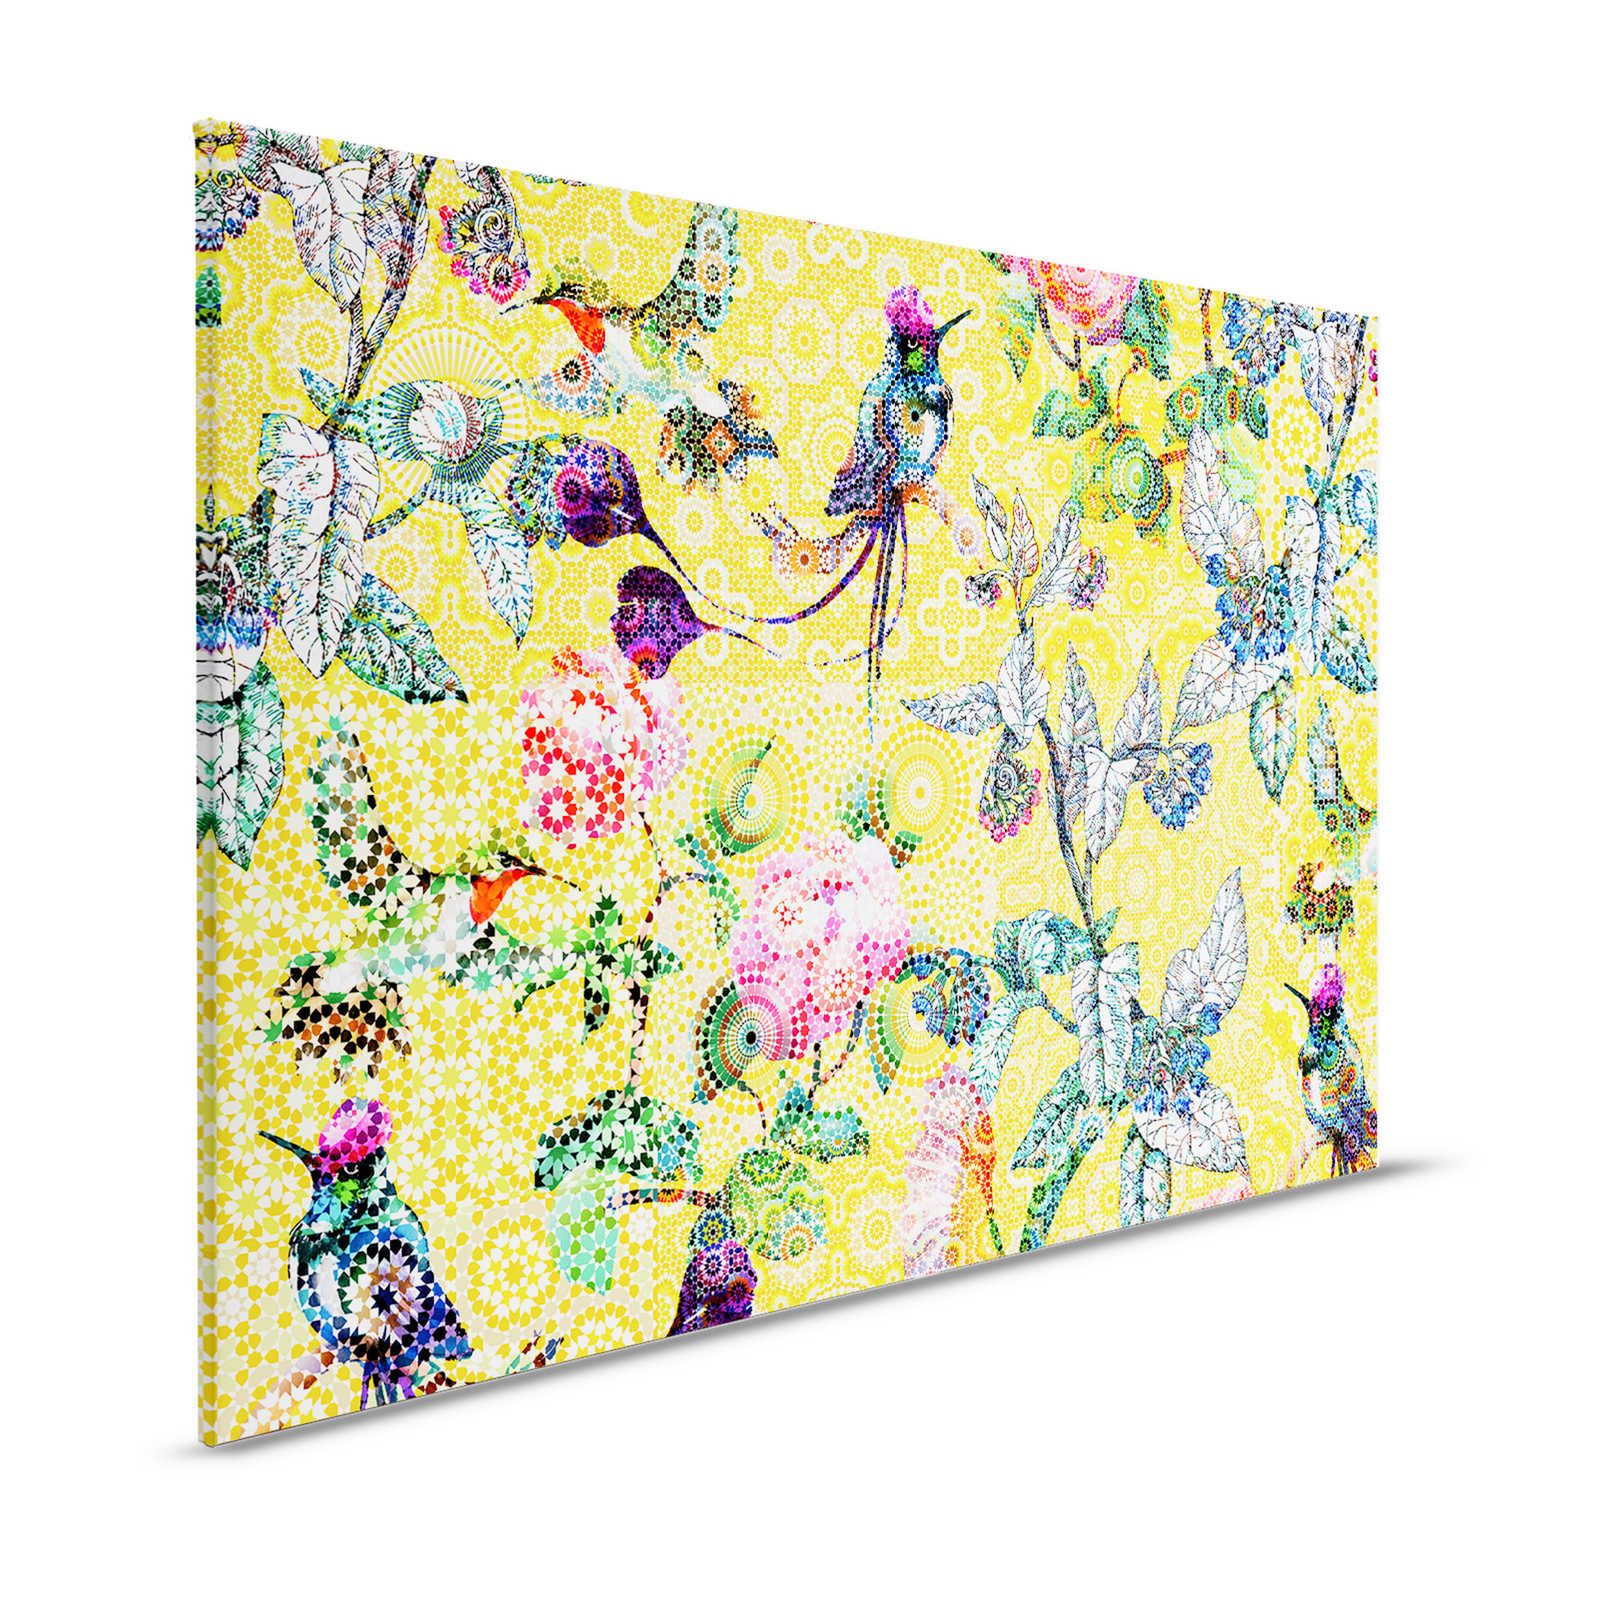 Canvas painting exotic flowers mosaic - 1,20 m x 0,80 m
